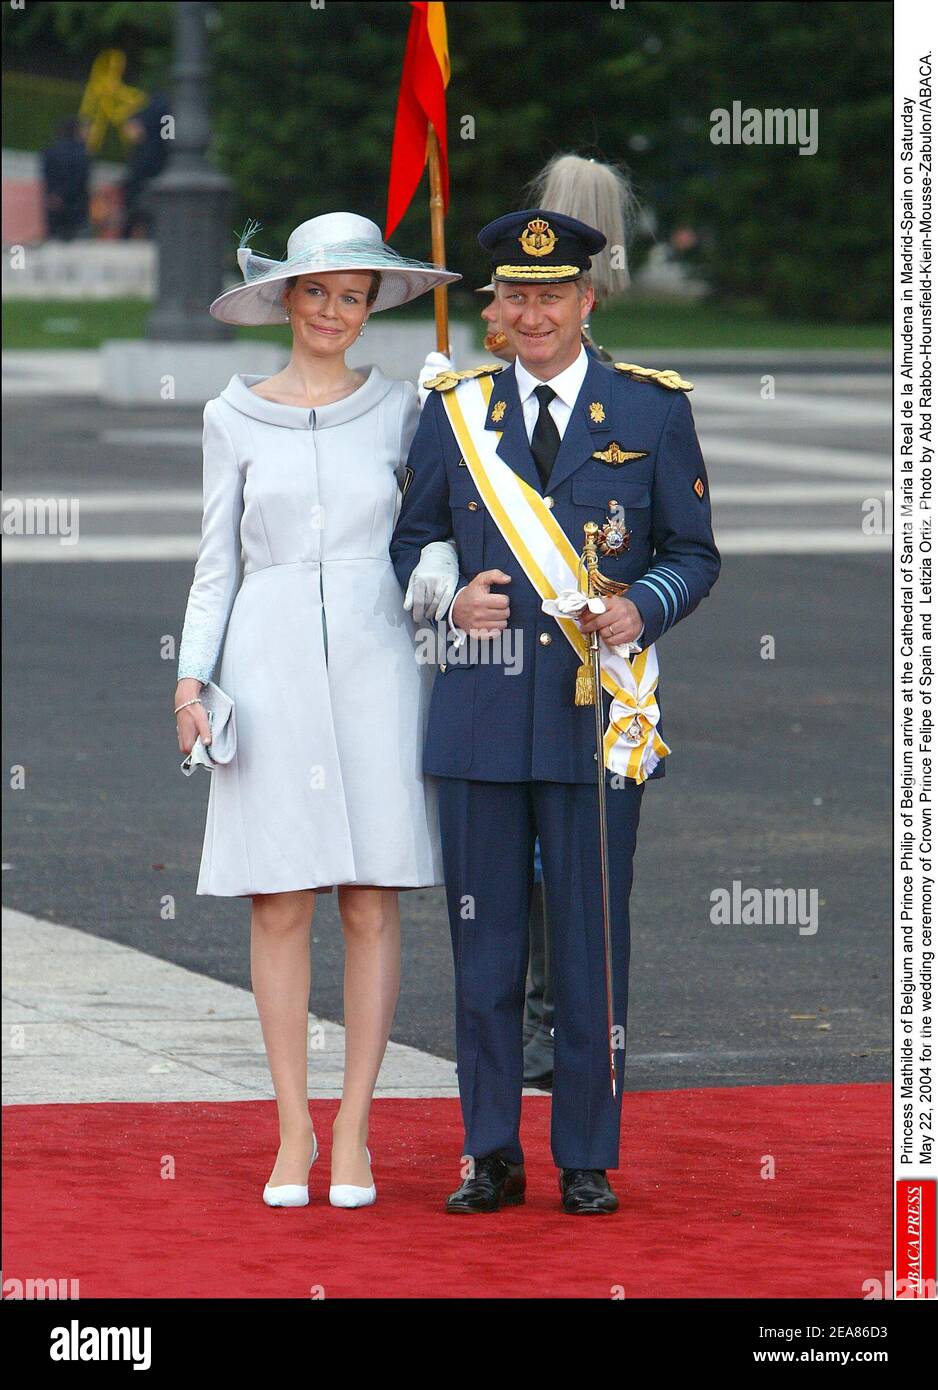 Princess Mathilde of Belgium and Prince Philippe of Belgium arrive at the Cathedral of Santa Maria la Real de la Almudena in Madrid-Spain on Saturday May 22, 2004 for the wedding ceremony of Crown Prince Felipe of Spain and Letizia Ortiz. Photo by Abd Rabbo-Hounsfield-Klein-Mousse-Zabulon/ABACA. Stock Photo